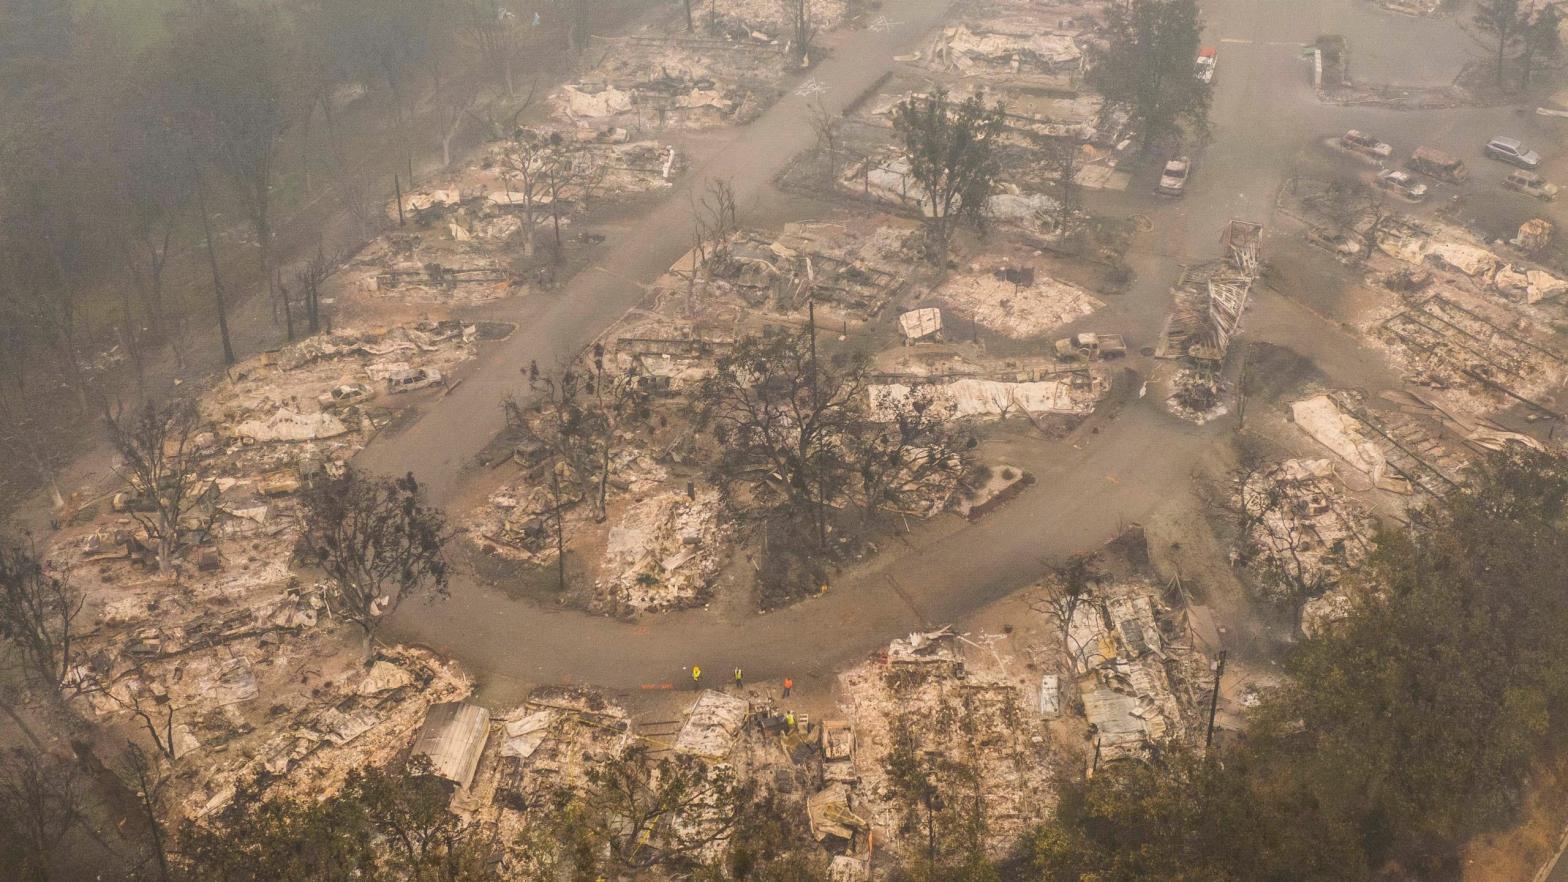 In this aerial view from a drone, damaged homes are seen in a mobile home park on September 11, 2020 in Ashland, Oregon. Hundreds of homes in Ashland and nearby towns have been lost due to wildfires. (Photo: David Ryder, Getty Images)